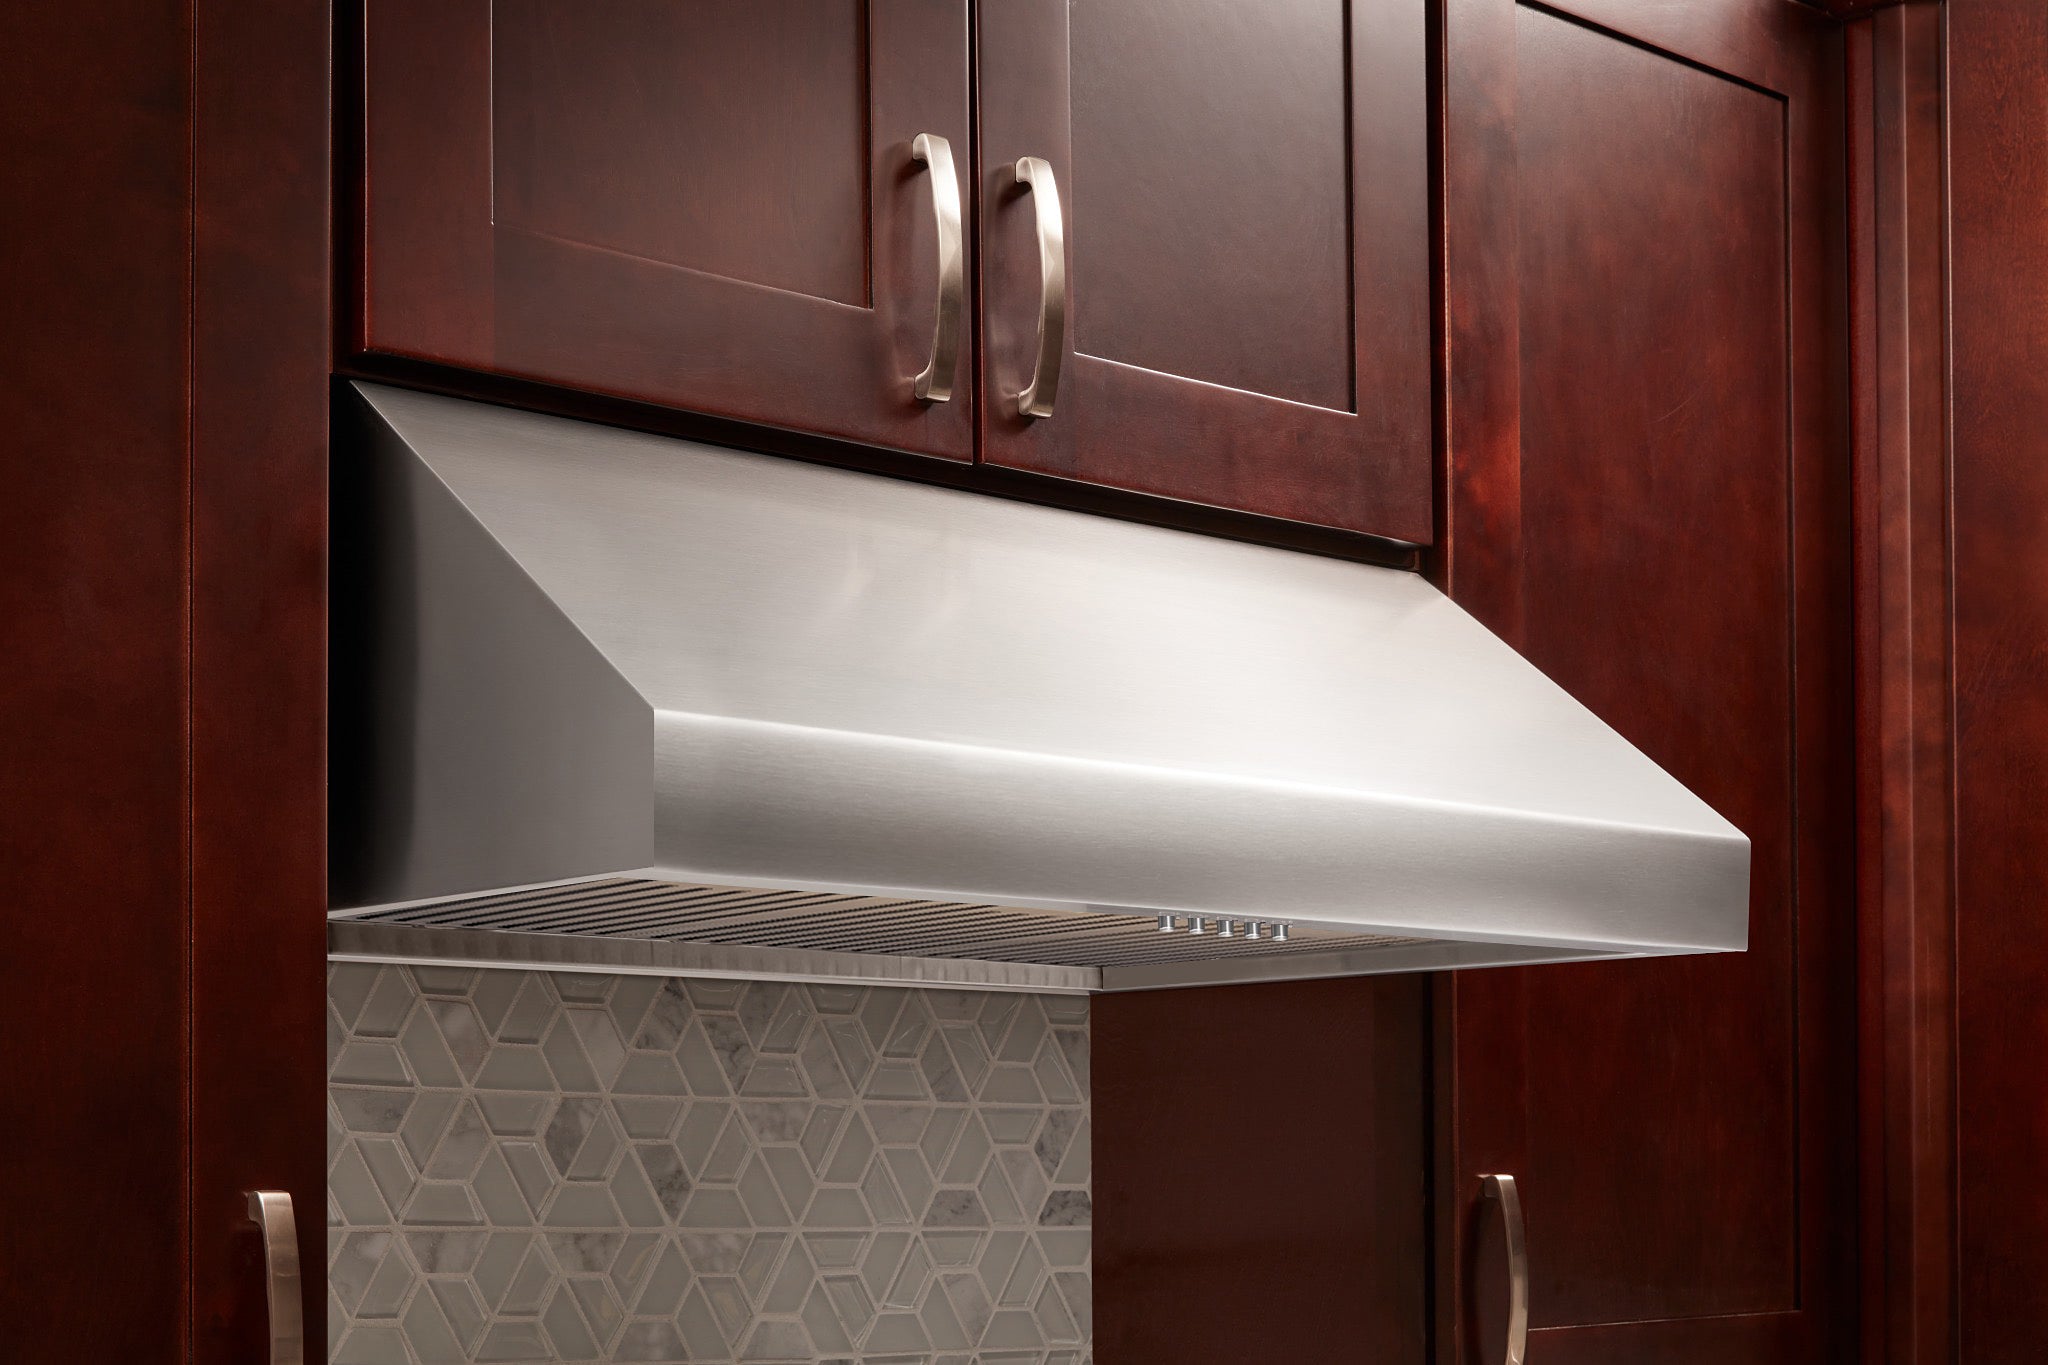 Thor Kitchen 30 Inch Professional Range Hood, 16.5 Inches Tall in Stainless Steel - Model TRH3005 (Renewed)